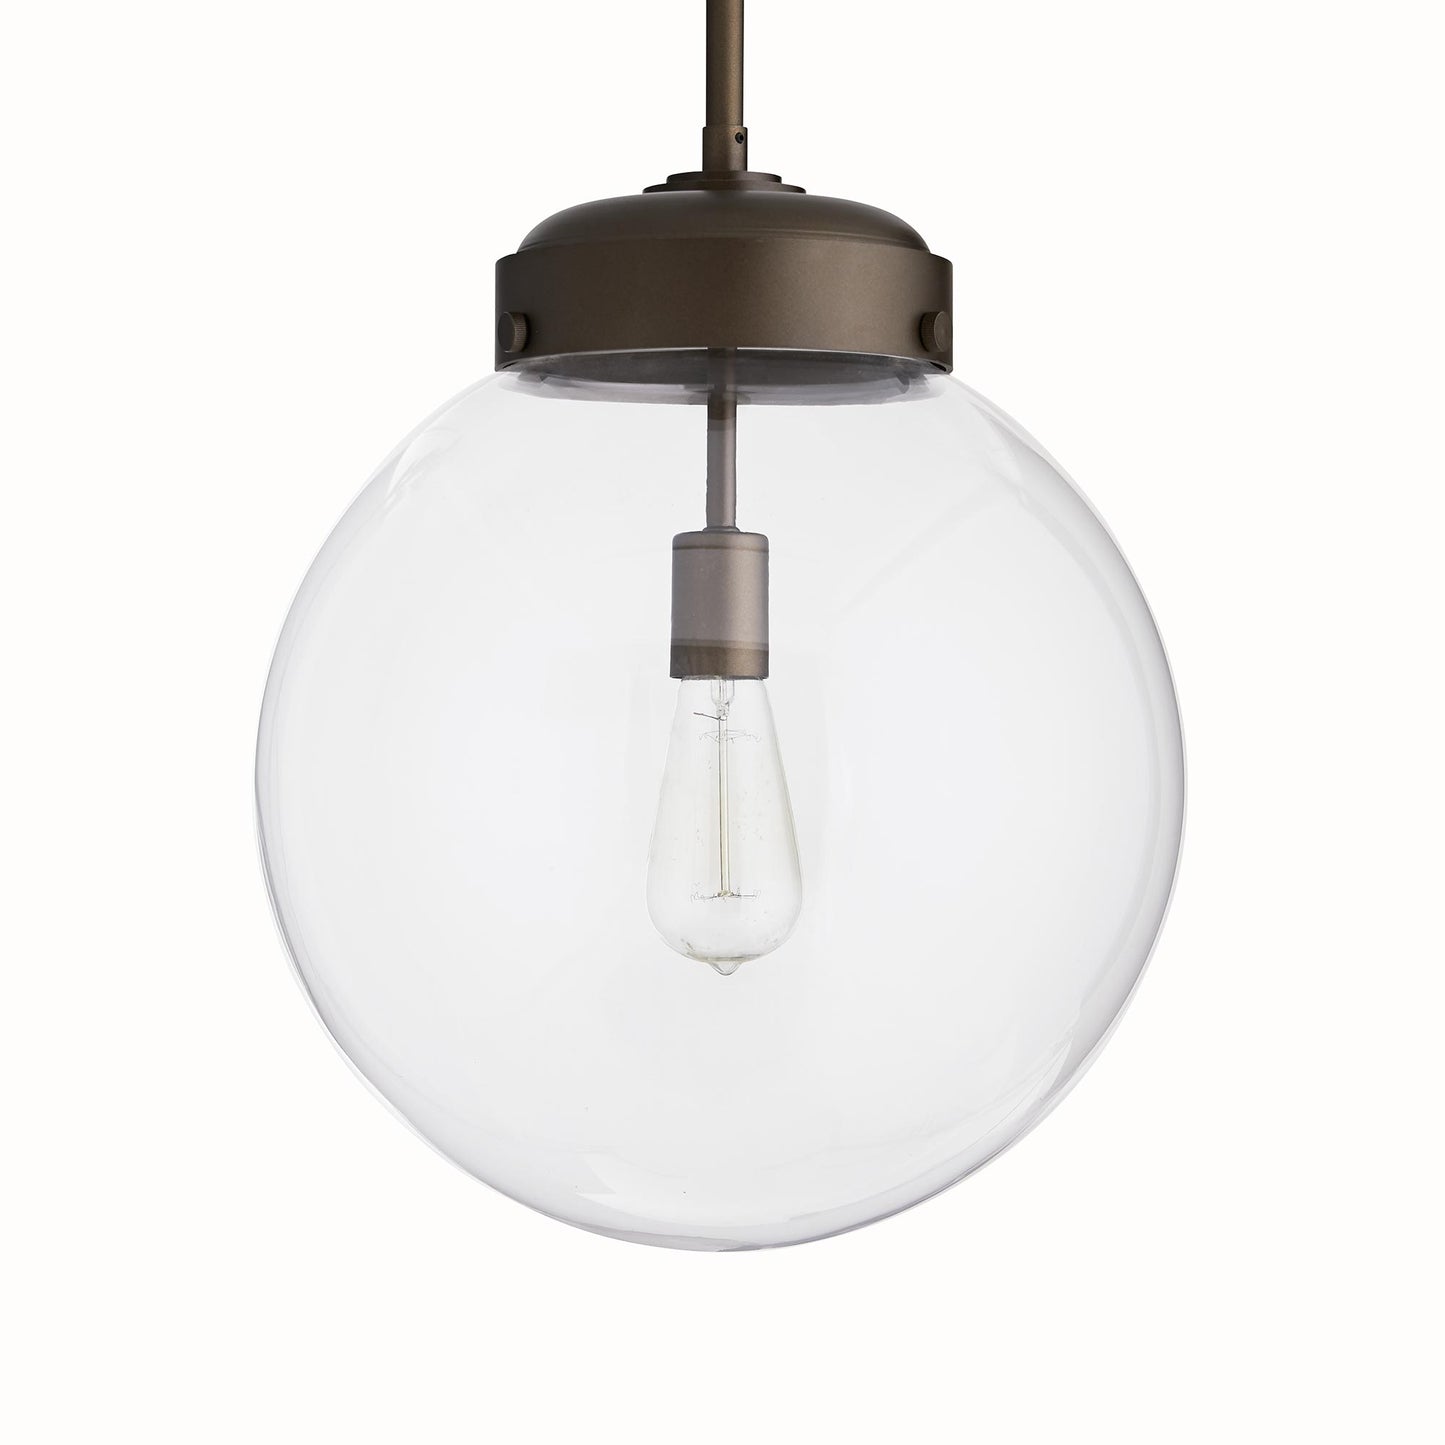 Reeves Large Outdoor Pendant - Antique Brass: Timeless Industrial Globe Pendant with Clear Glass Shade